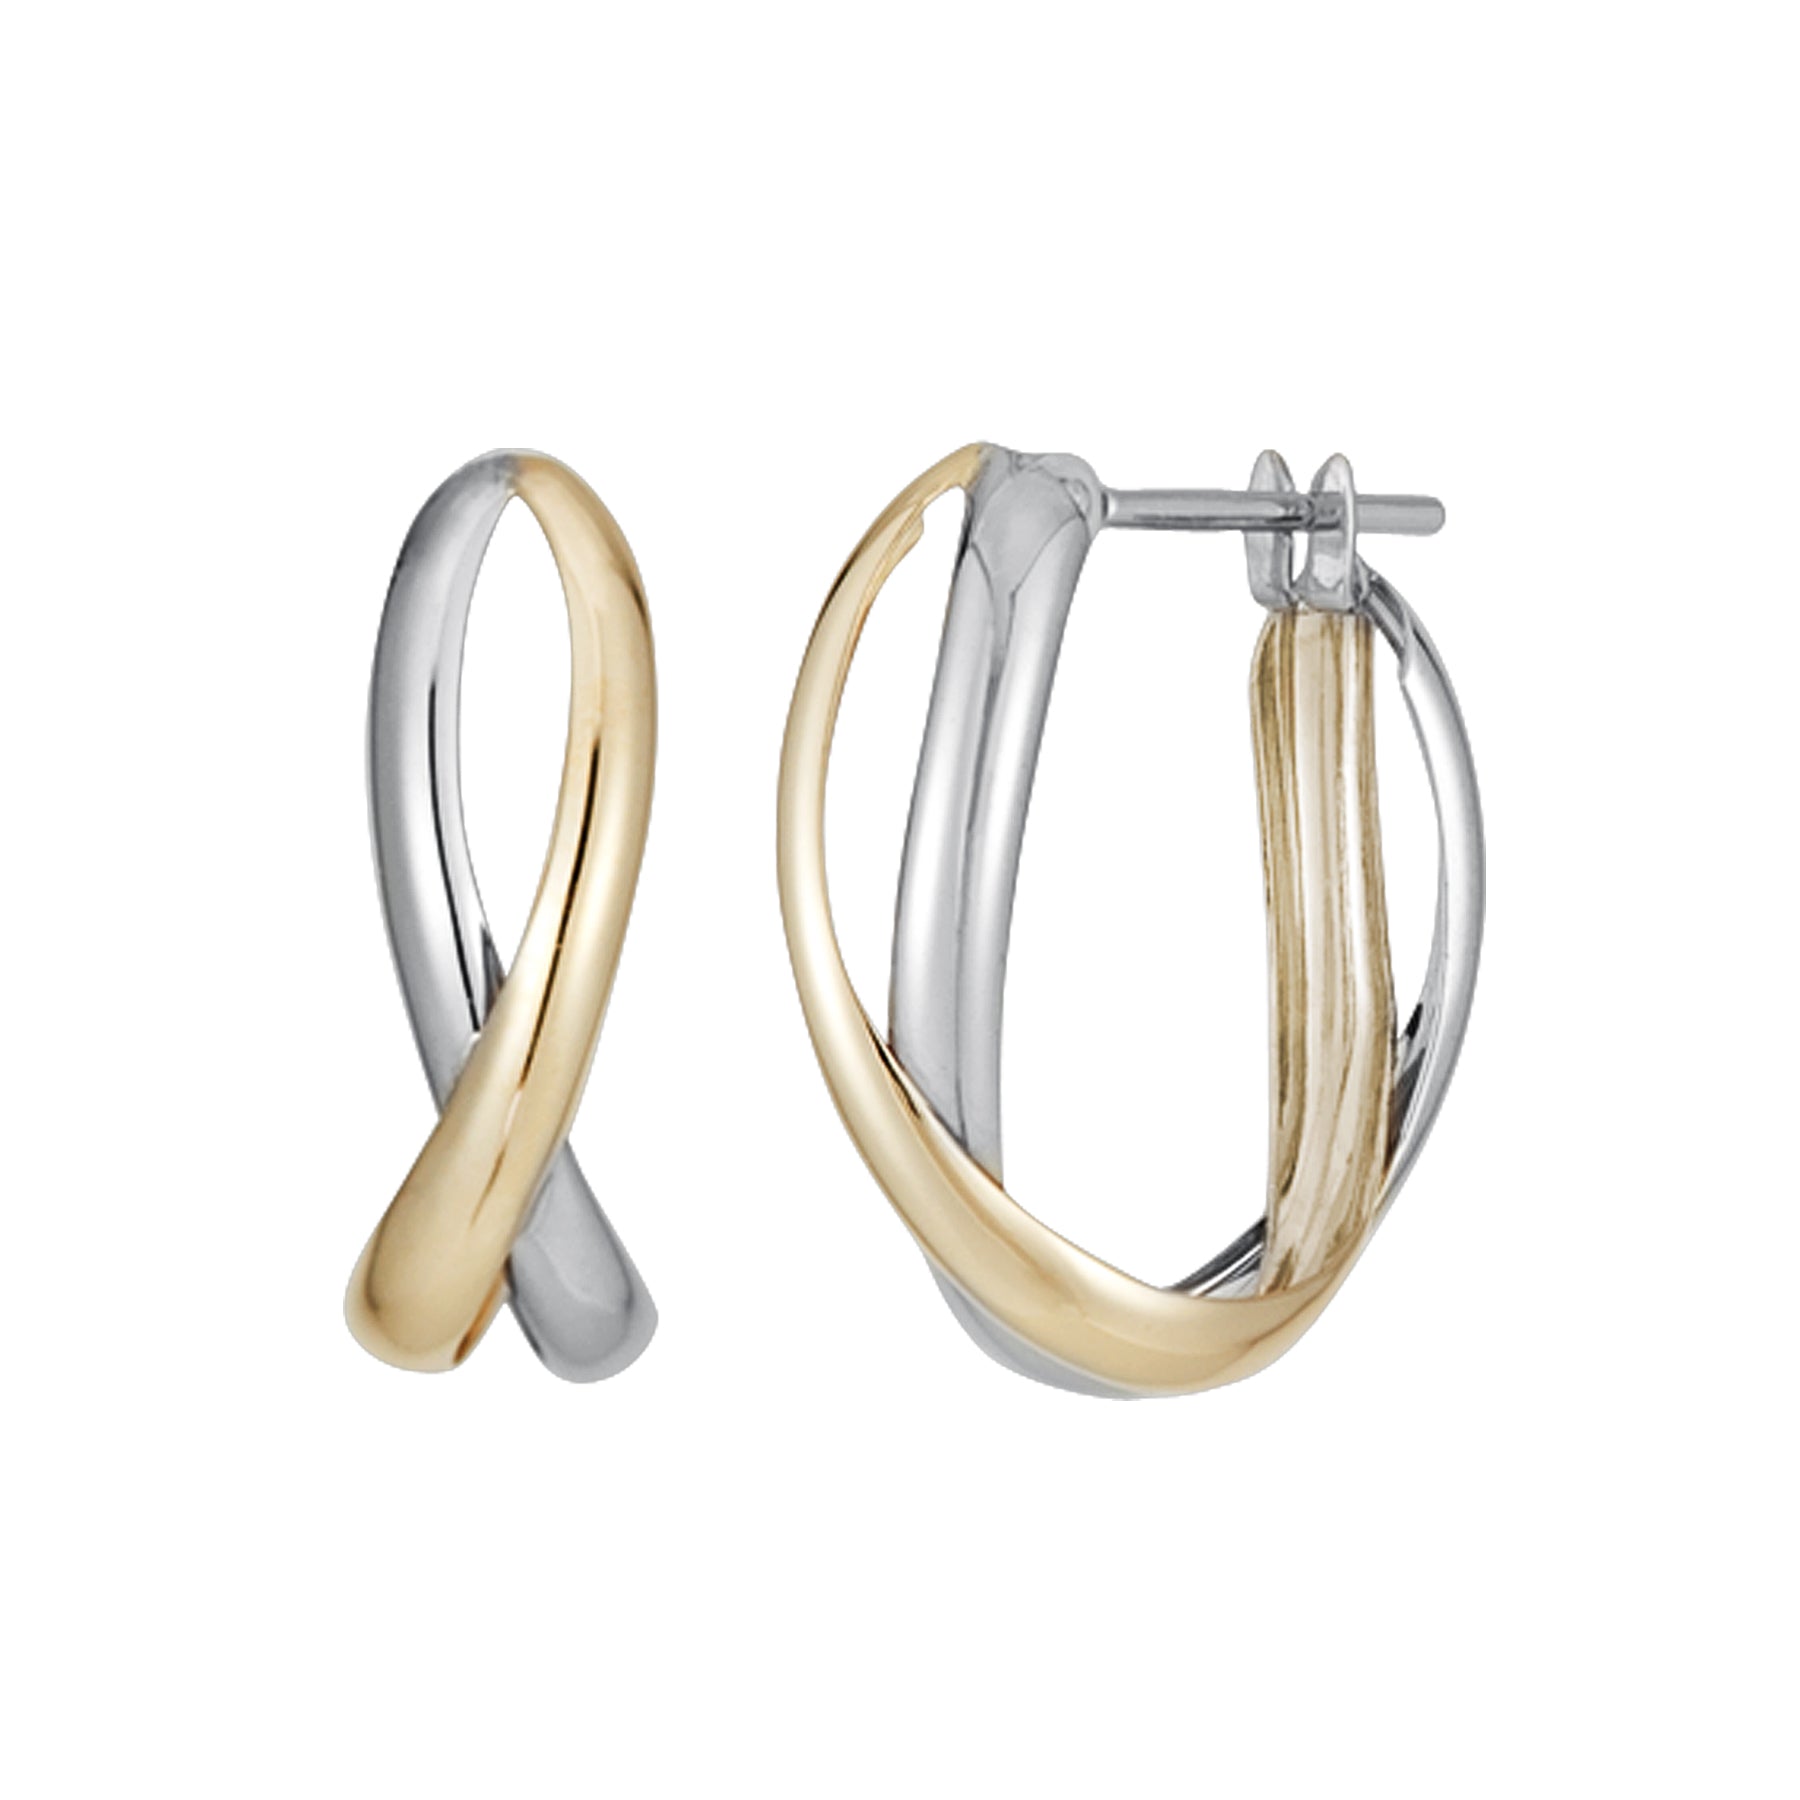 14K/10K Gold Cross Hoop Earrings (Large) (White Gold / Yellow Gold) - Product Image